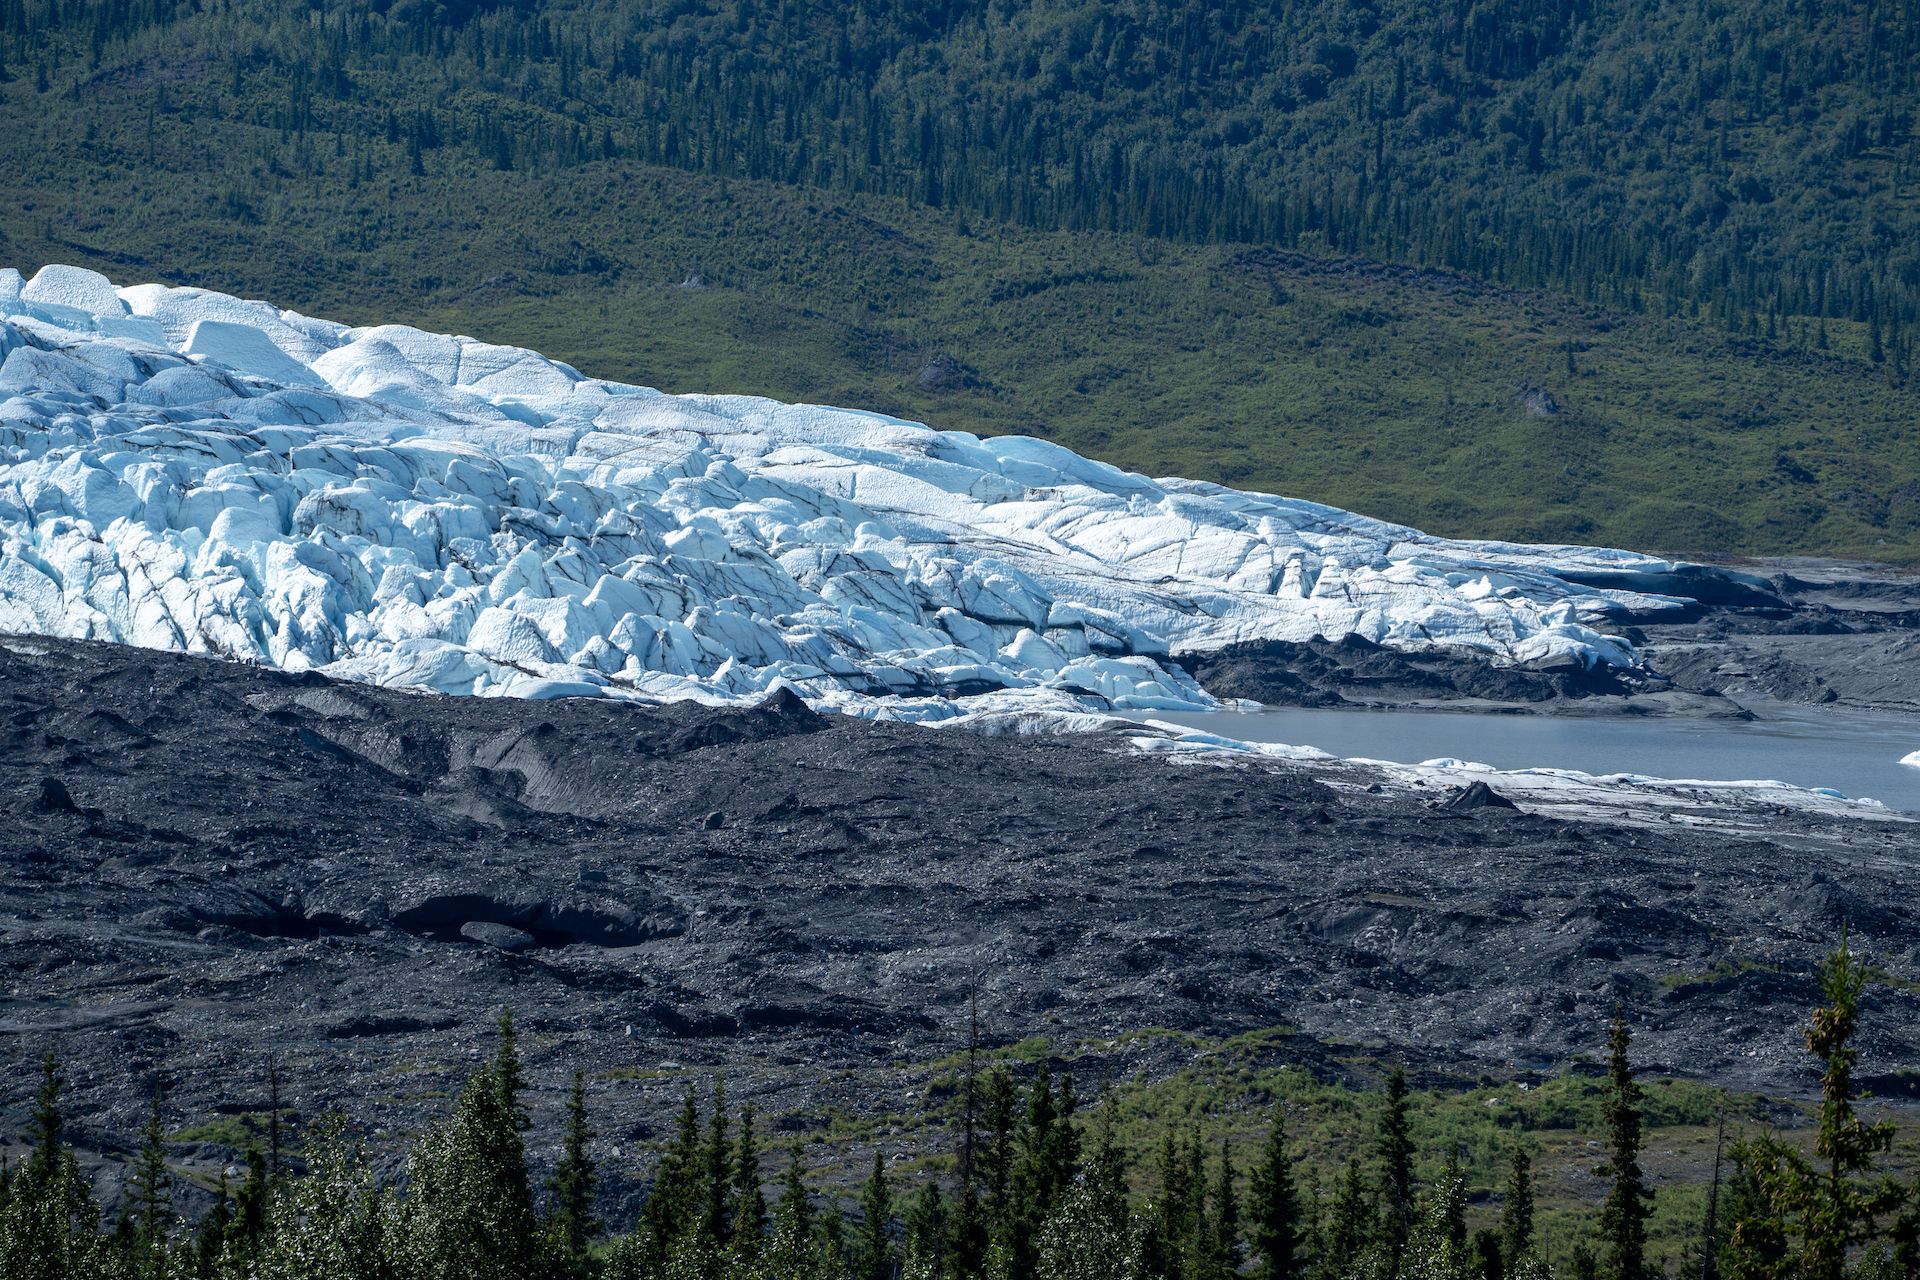 A close-up of the Matanuska Glacier that ends its course just a couple miles from the highway.